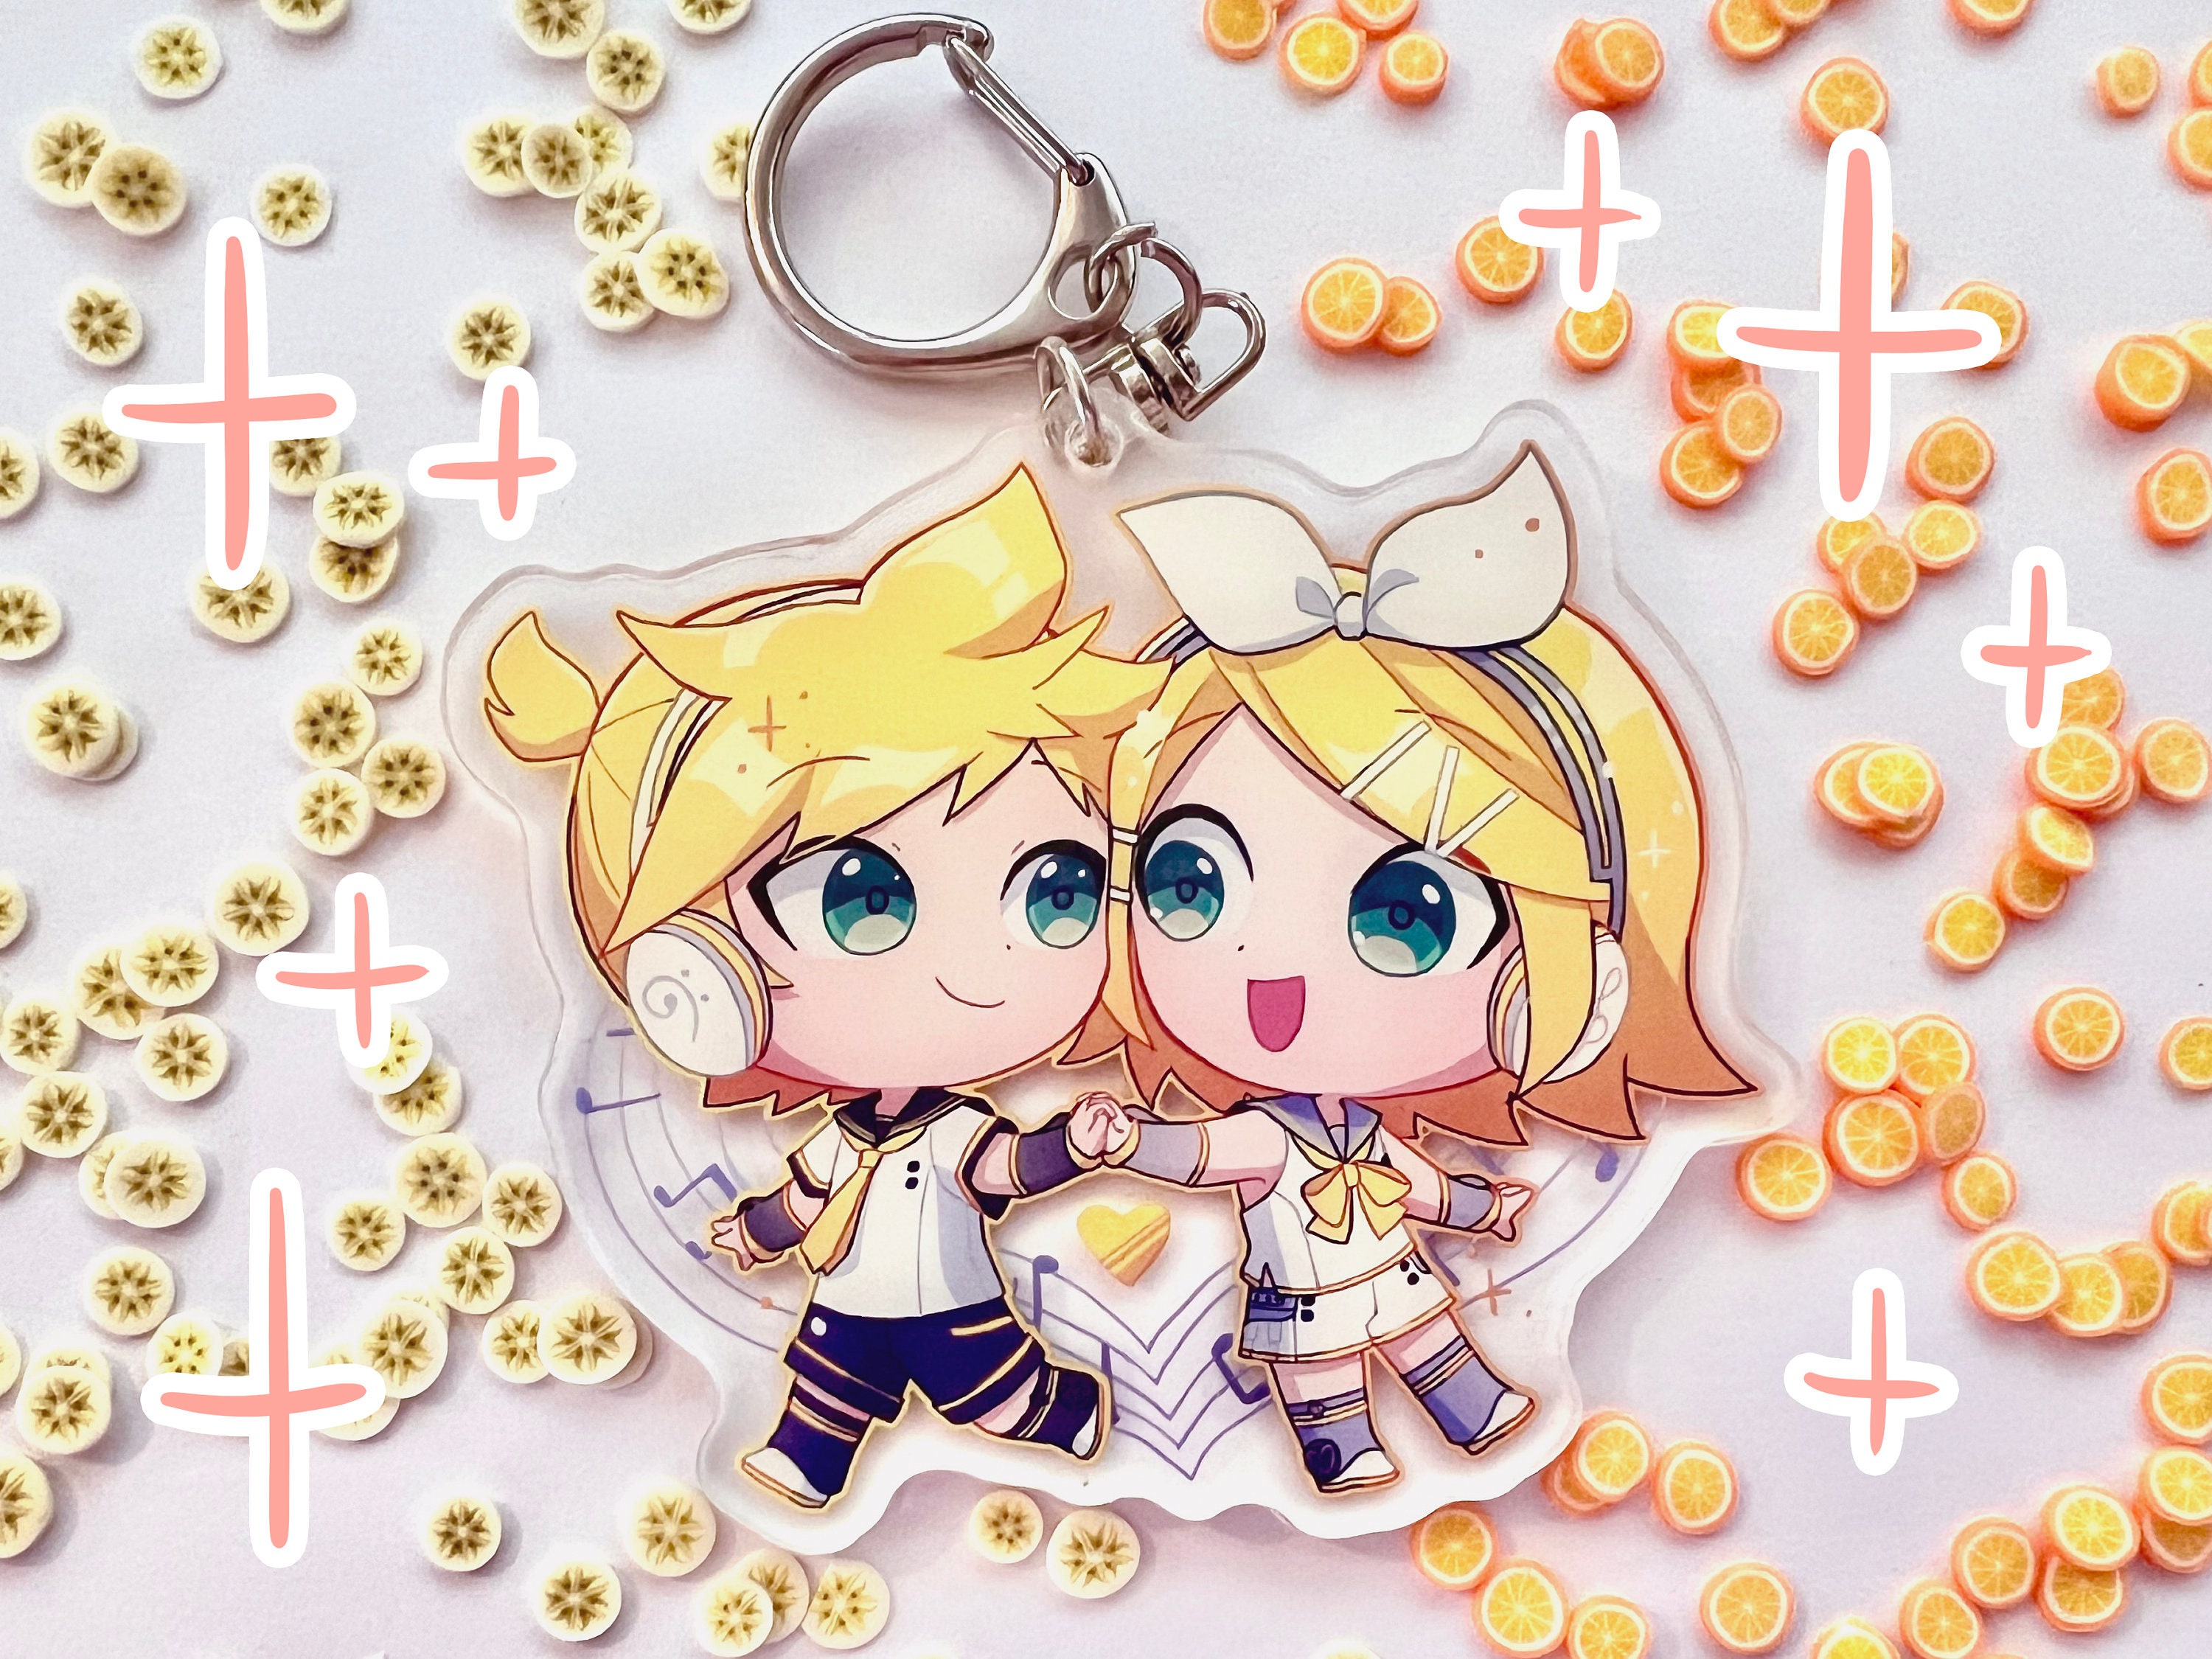 Vocaloid Rin and Len Holographic and Vinyl Stickers weatherproof Die-cut  Laminated Stickers Cute Kawaii Anime Stickers 